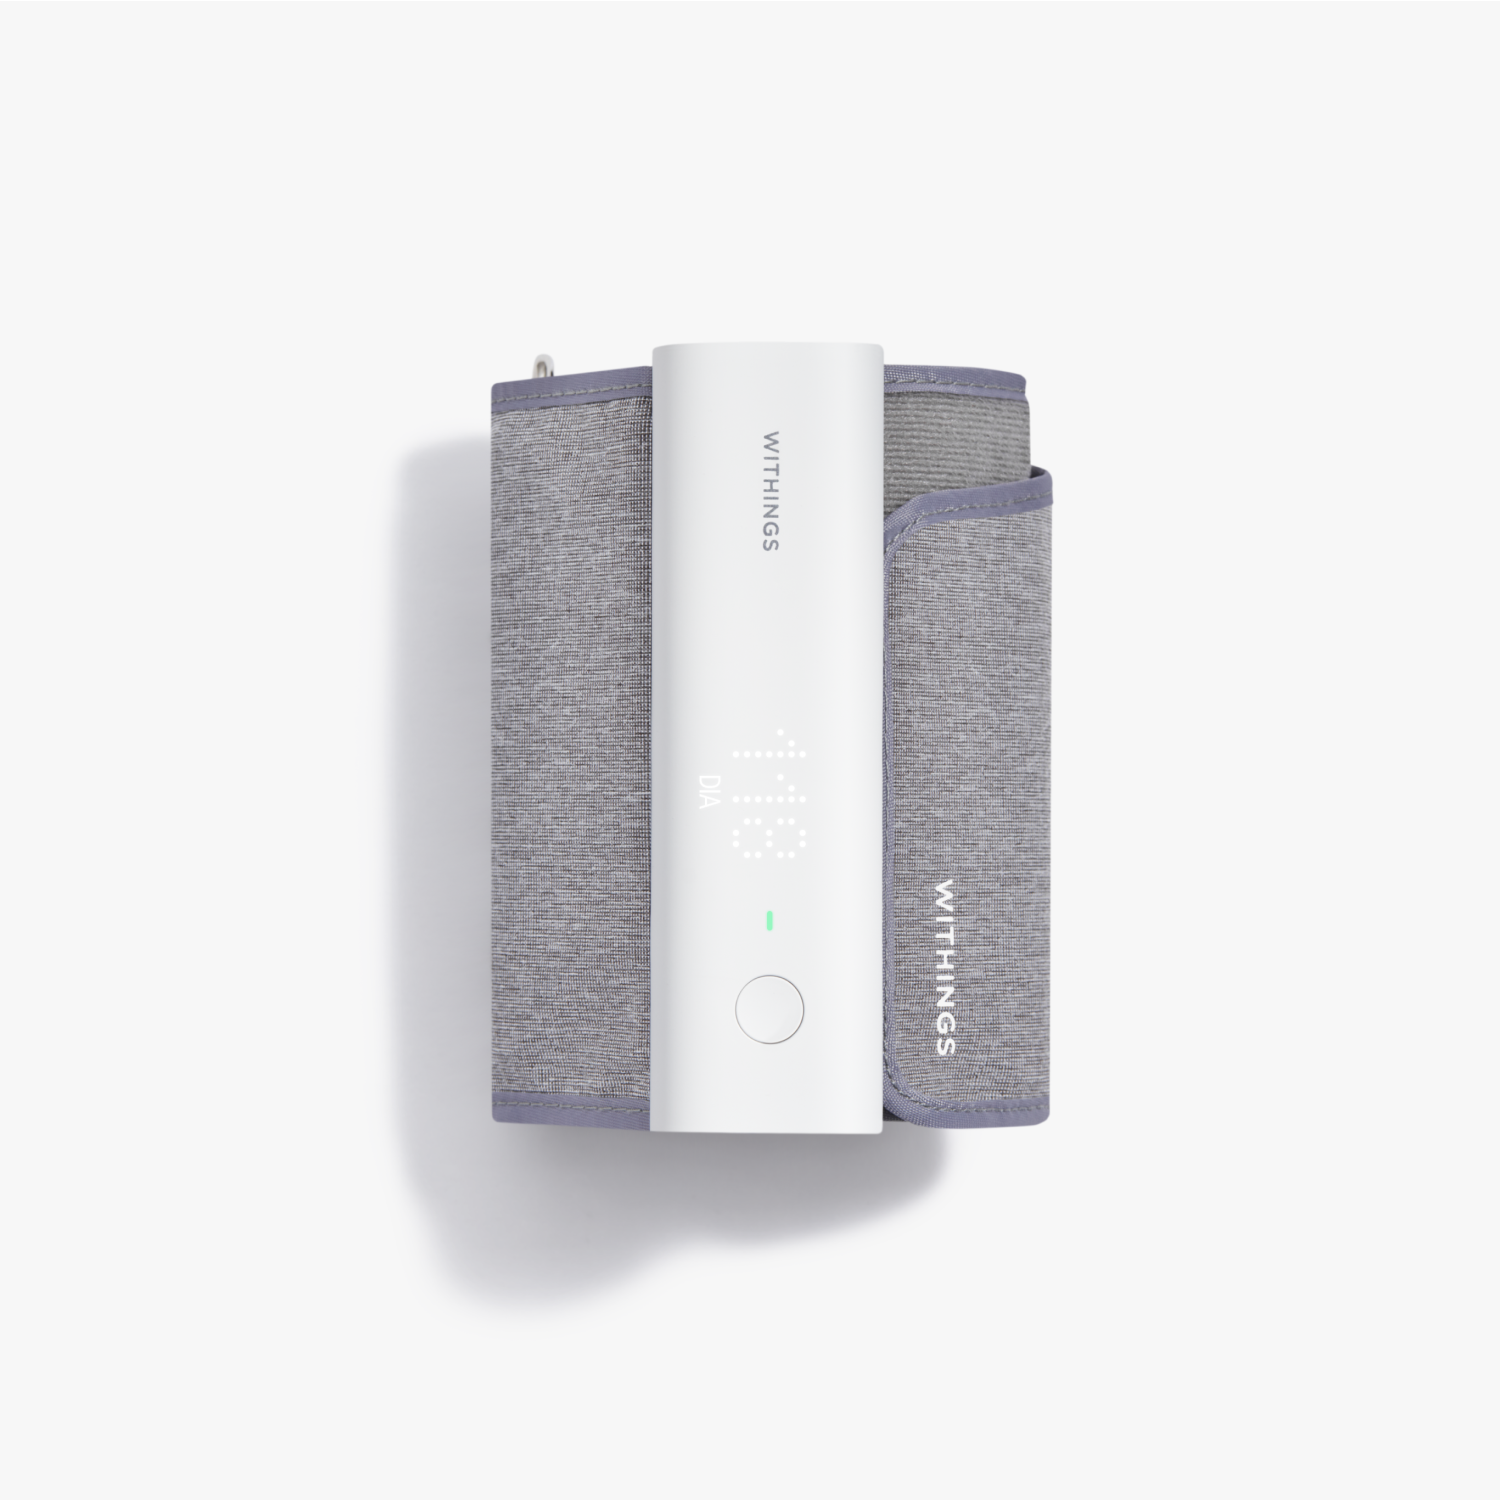 Withings BPM Connect - Wi-Fi Smart Blood Pressure Monitor - FDA cleared, Heart rate monitoring, Automatic data sync -  Withings Official Store